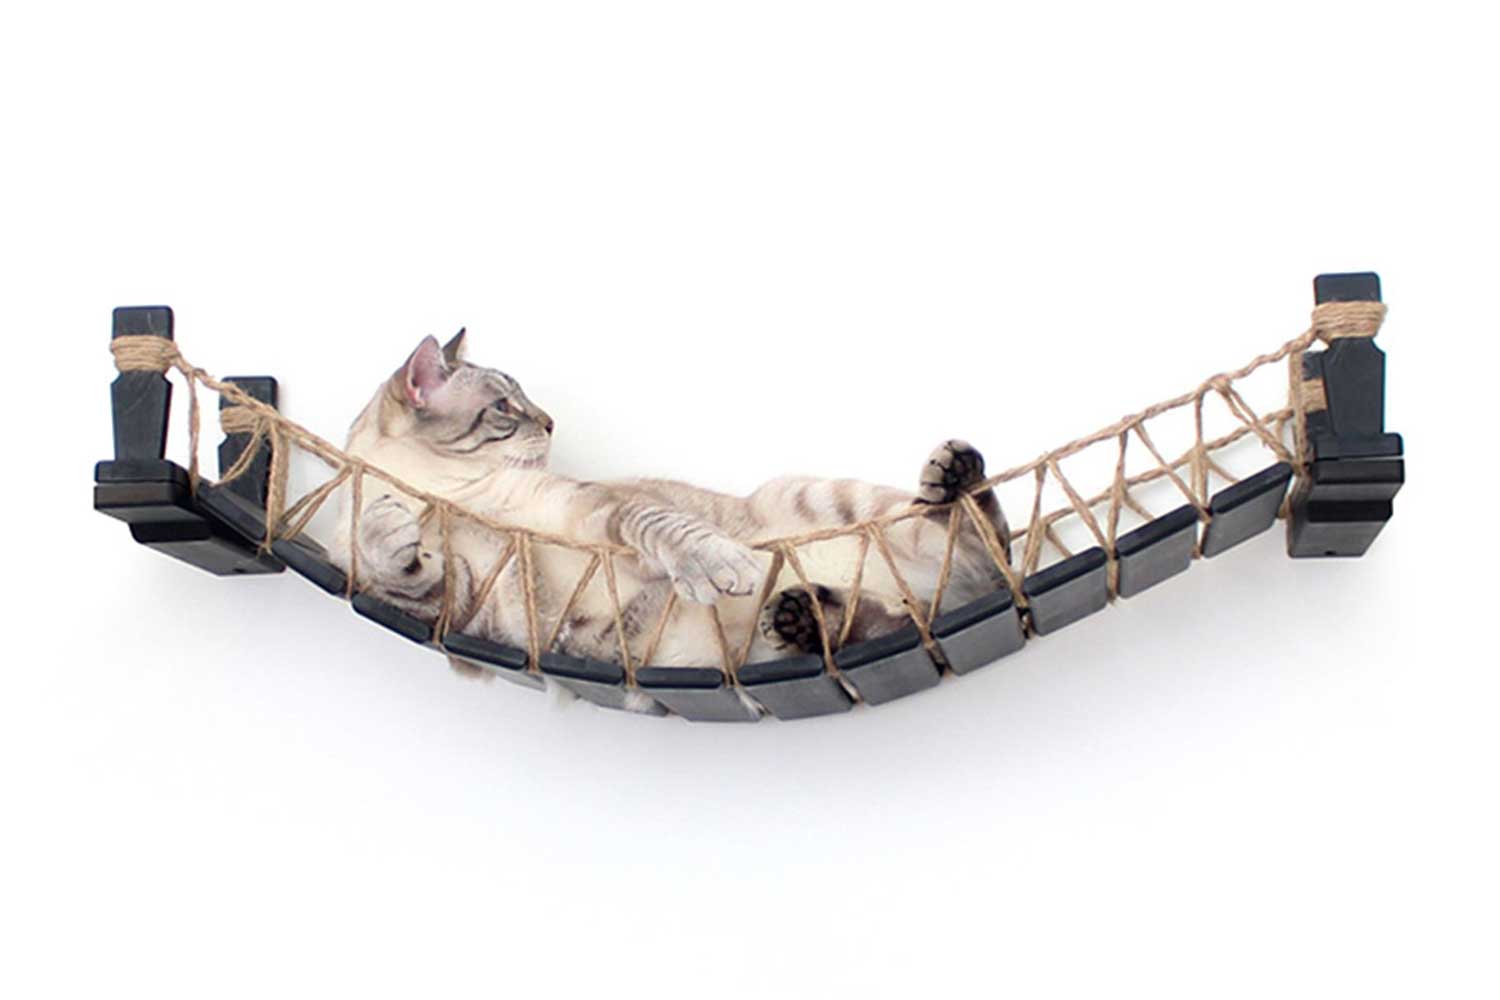 Lovely kitty lounging about on 34" Onyx/Twine bridge.